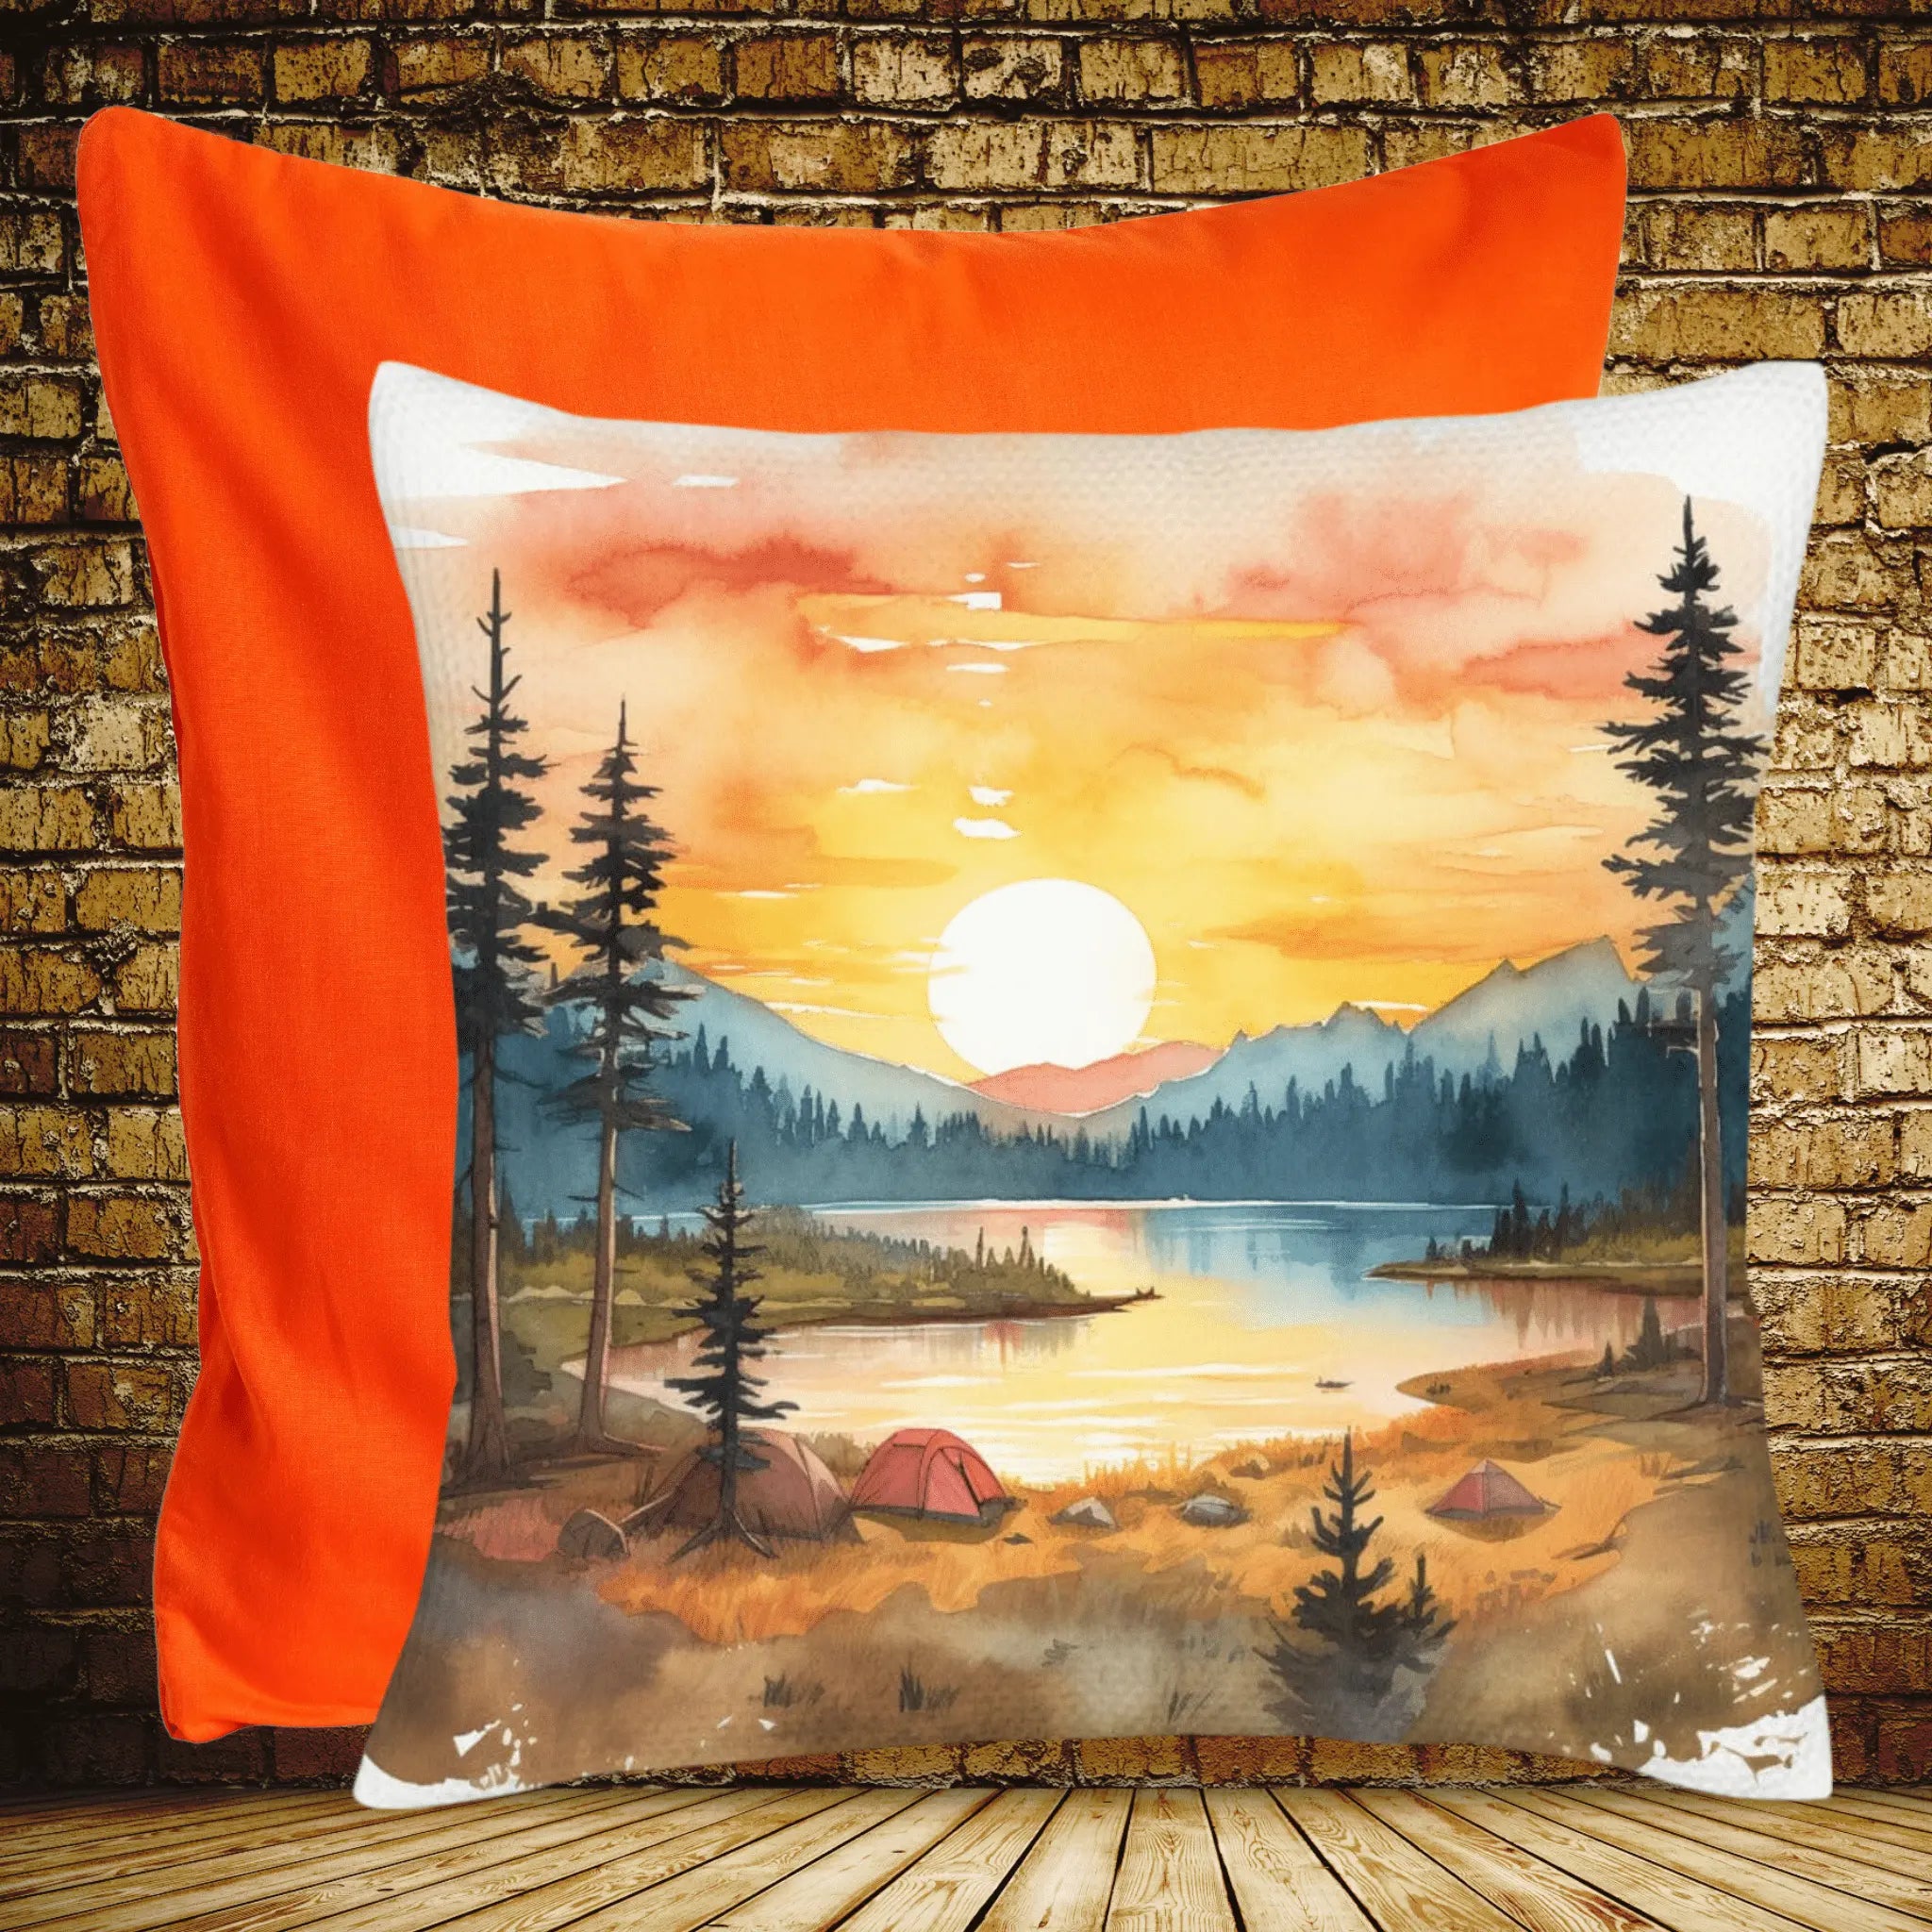 Camp Patterned Linens High Quality Pillow Case